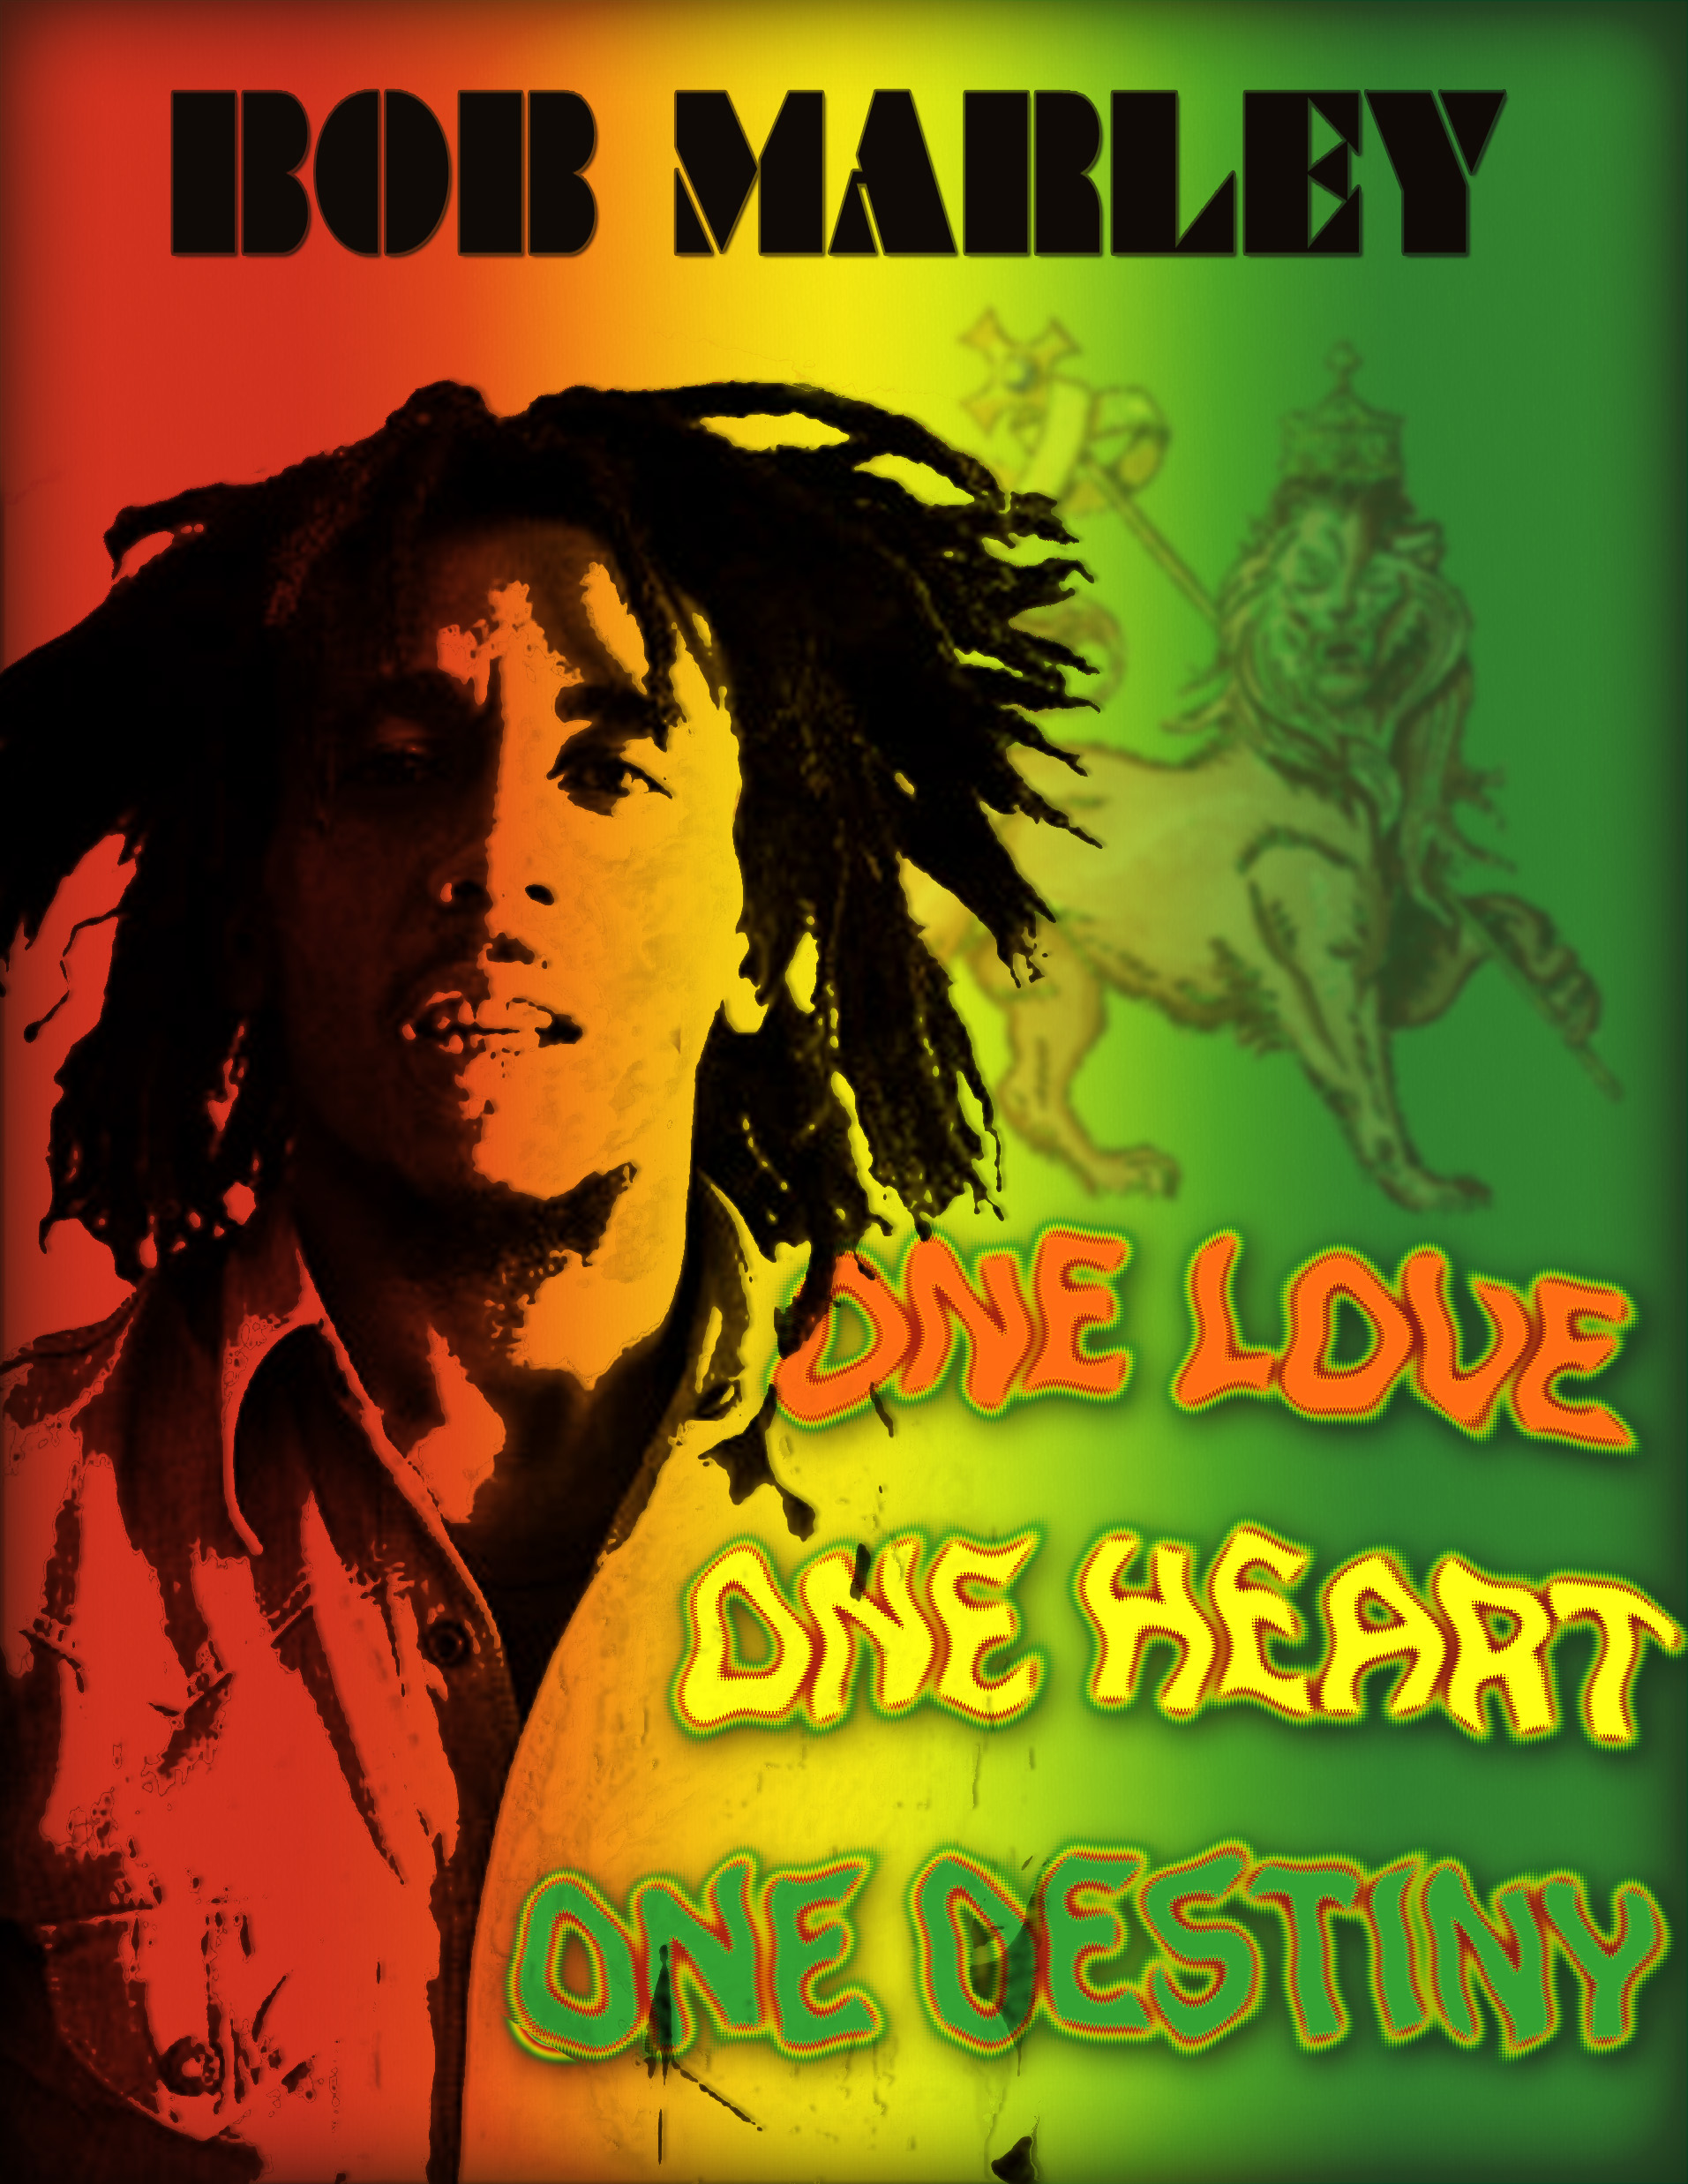 Pictures Of True Legend Bob Marley1913 x 2475